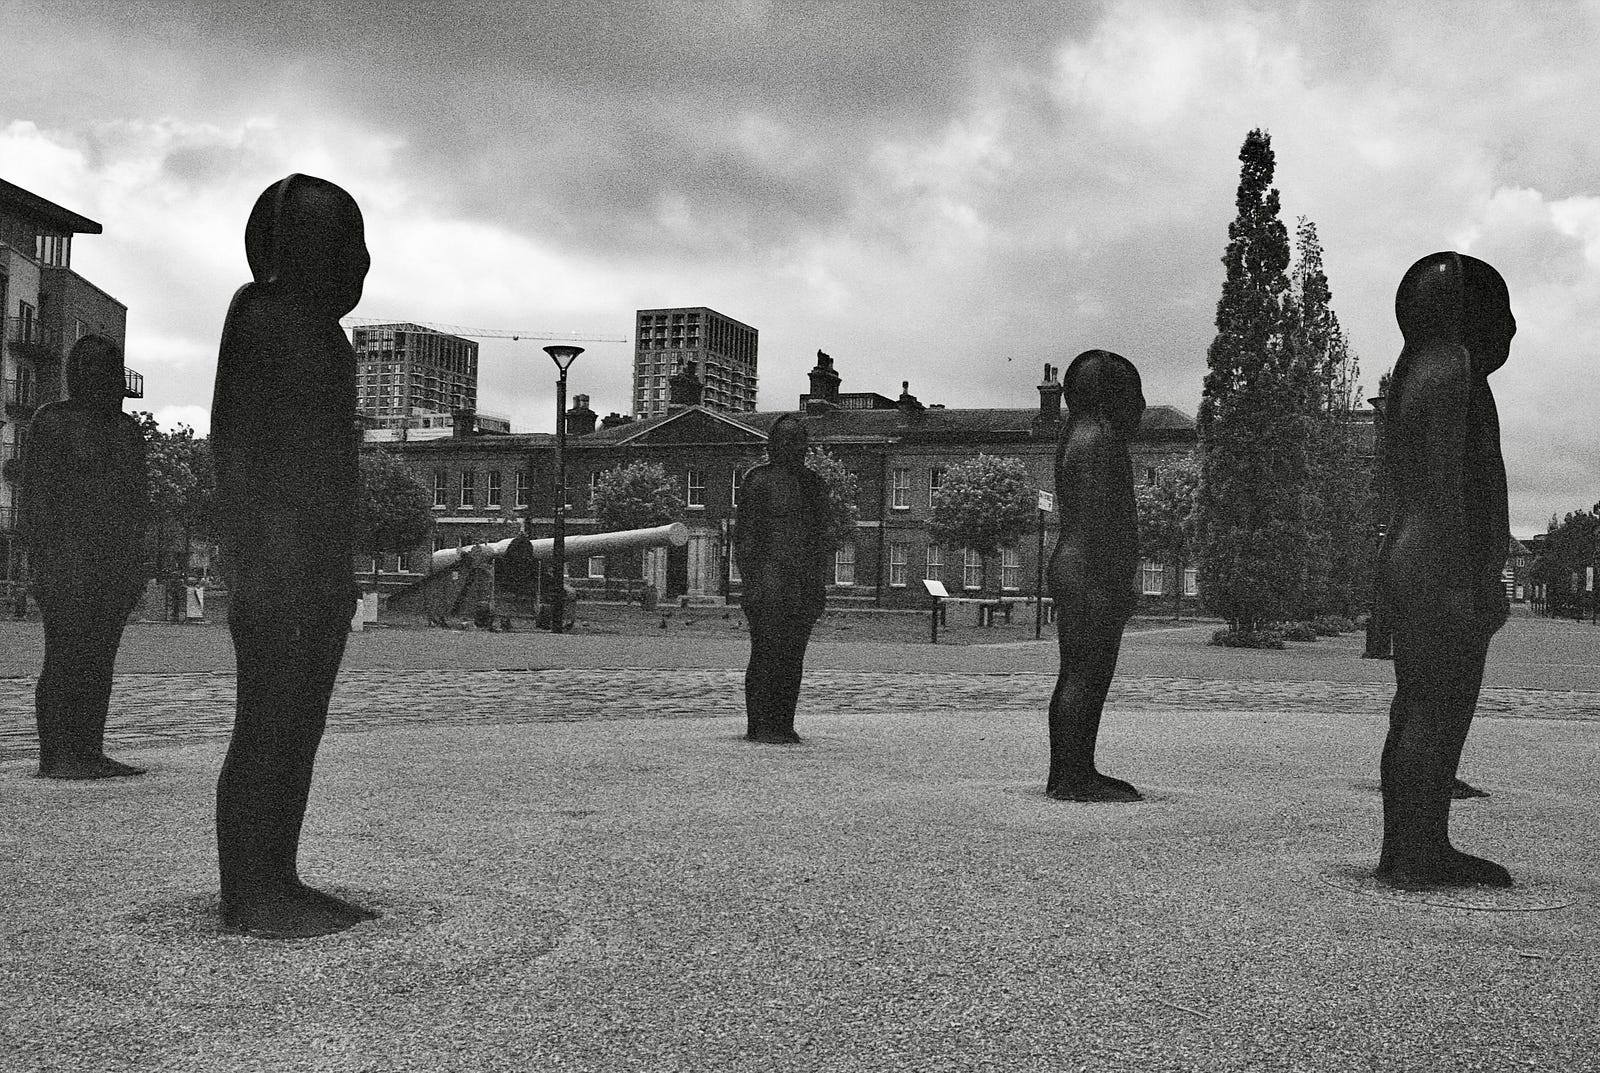 A black and white image of statues at the Royal Arsenal Riverside development in Woolwich, southeast London.